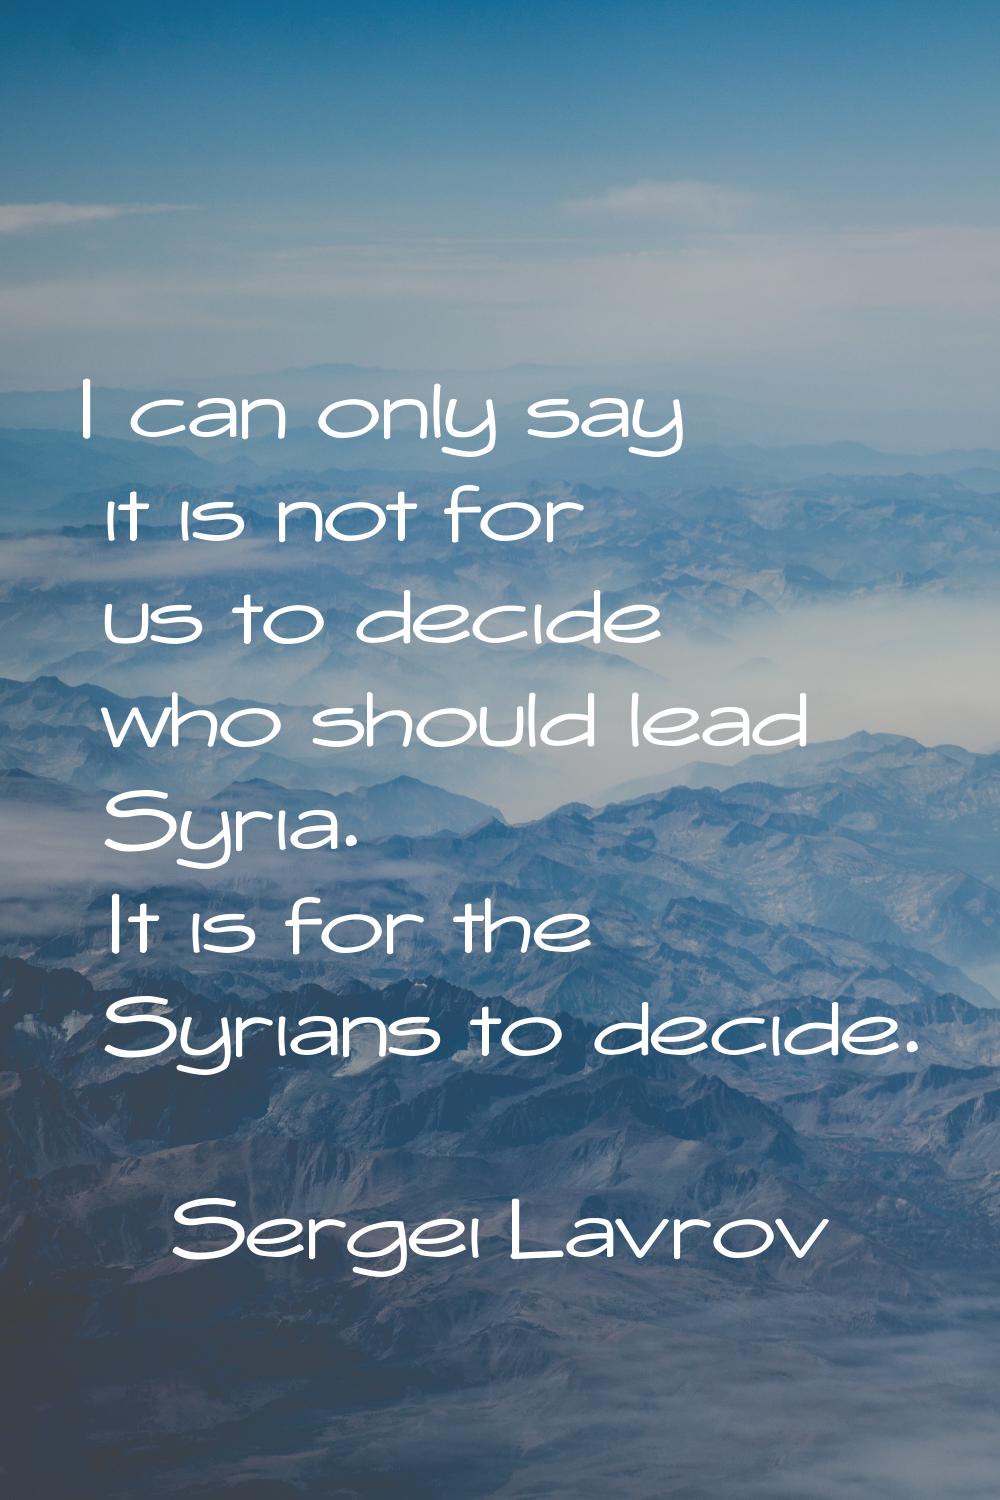 I can only say it is not for us to decide who should lead Syria. It is for the Syrians to decide.